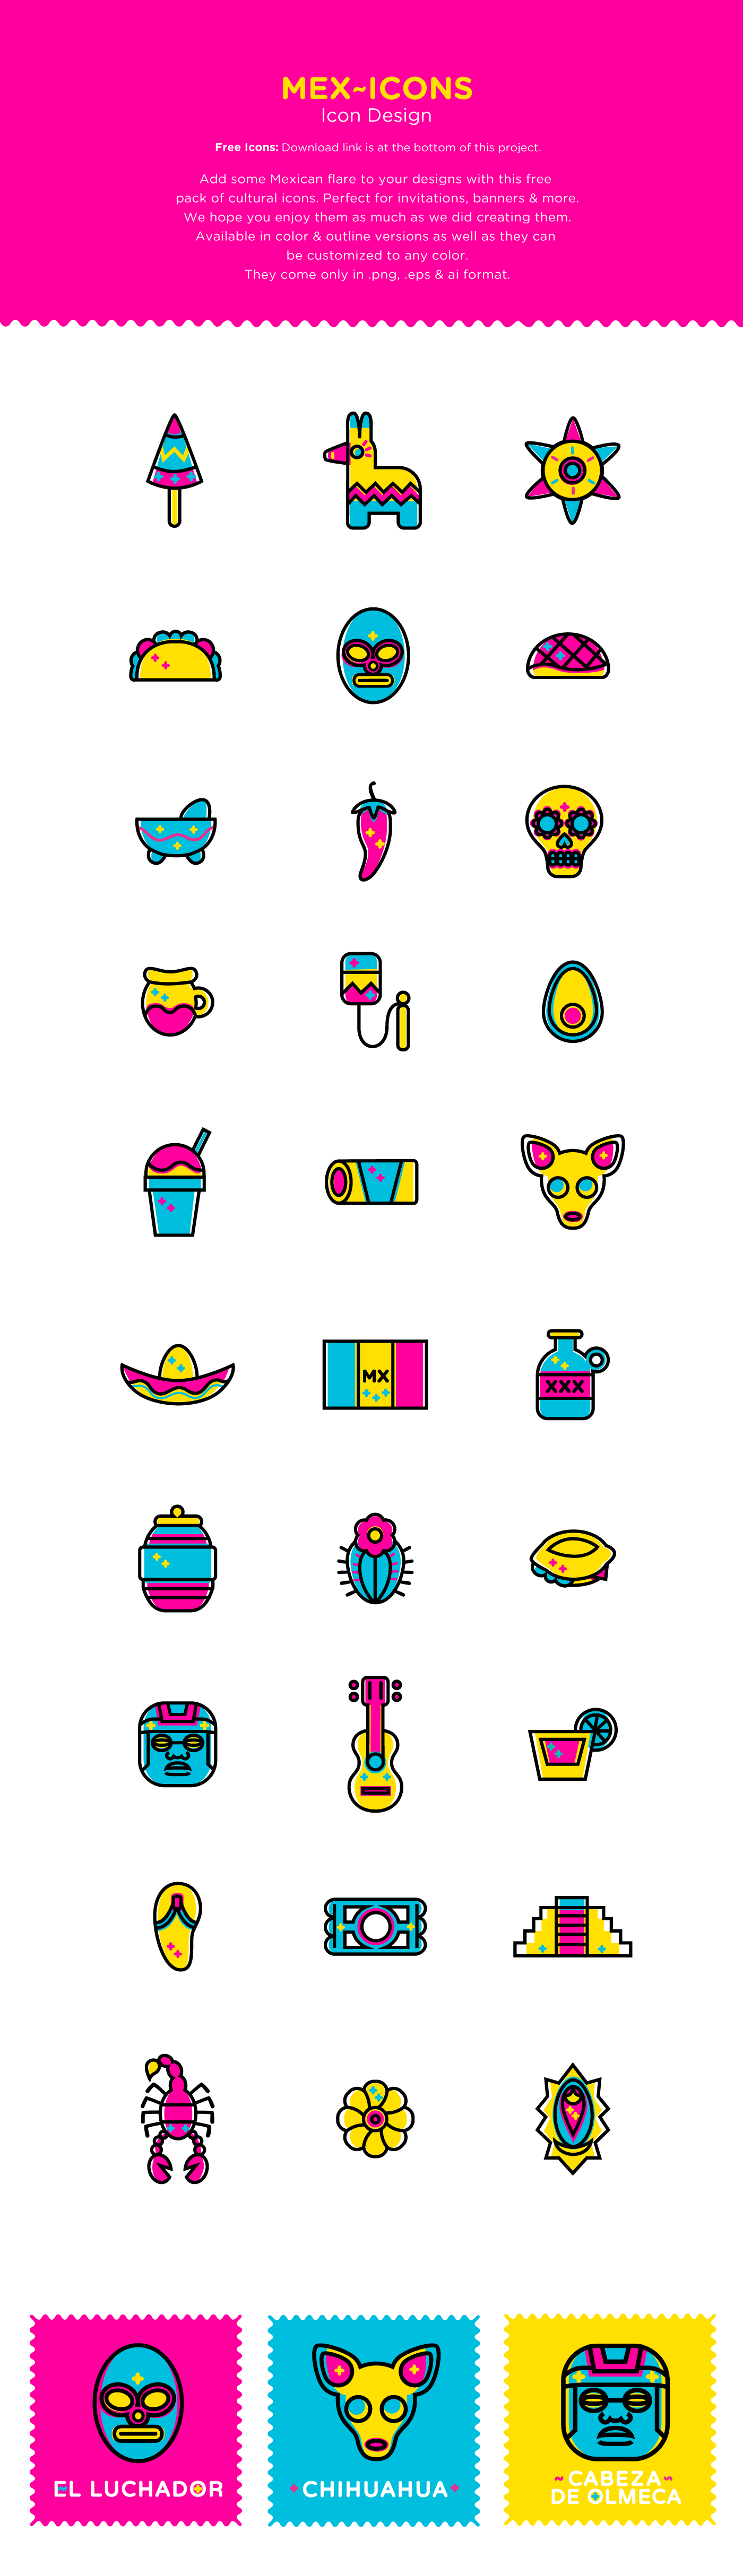 freeicons freesocialicons mexicanicons Mexican Piñata luchador ink8yte free icons mexicanflare chihuahua dog taco avocado